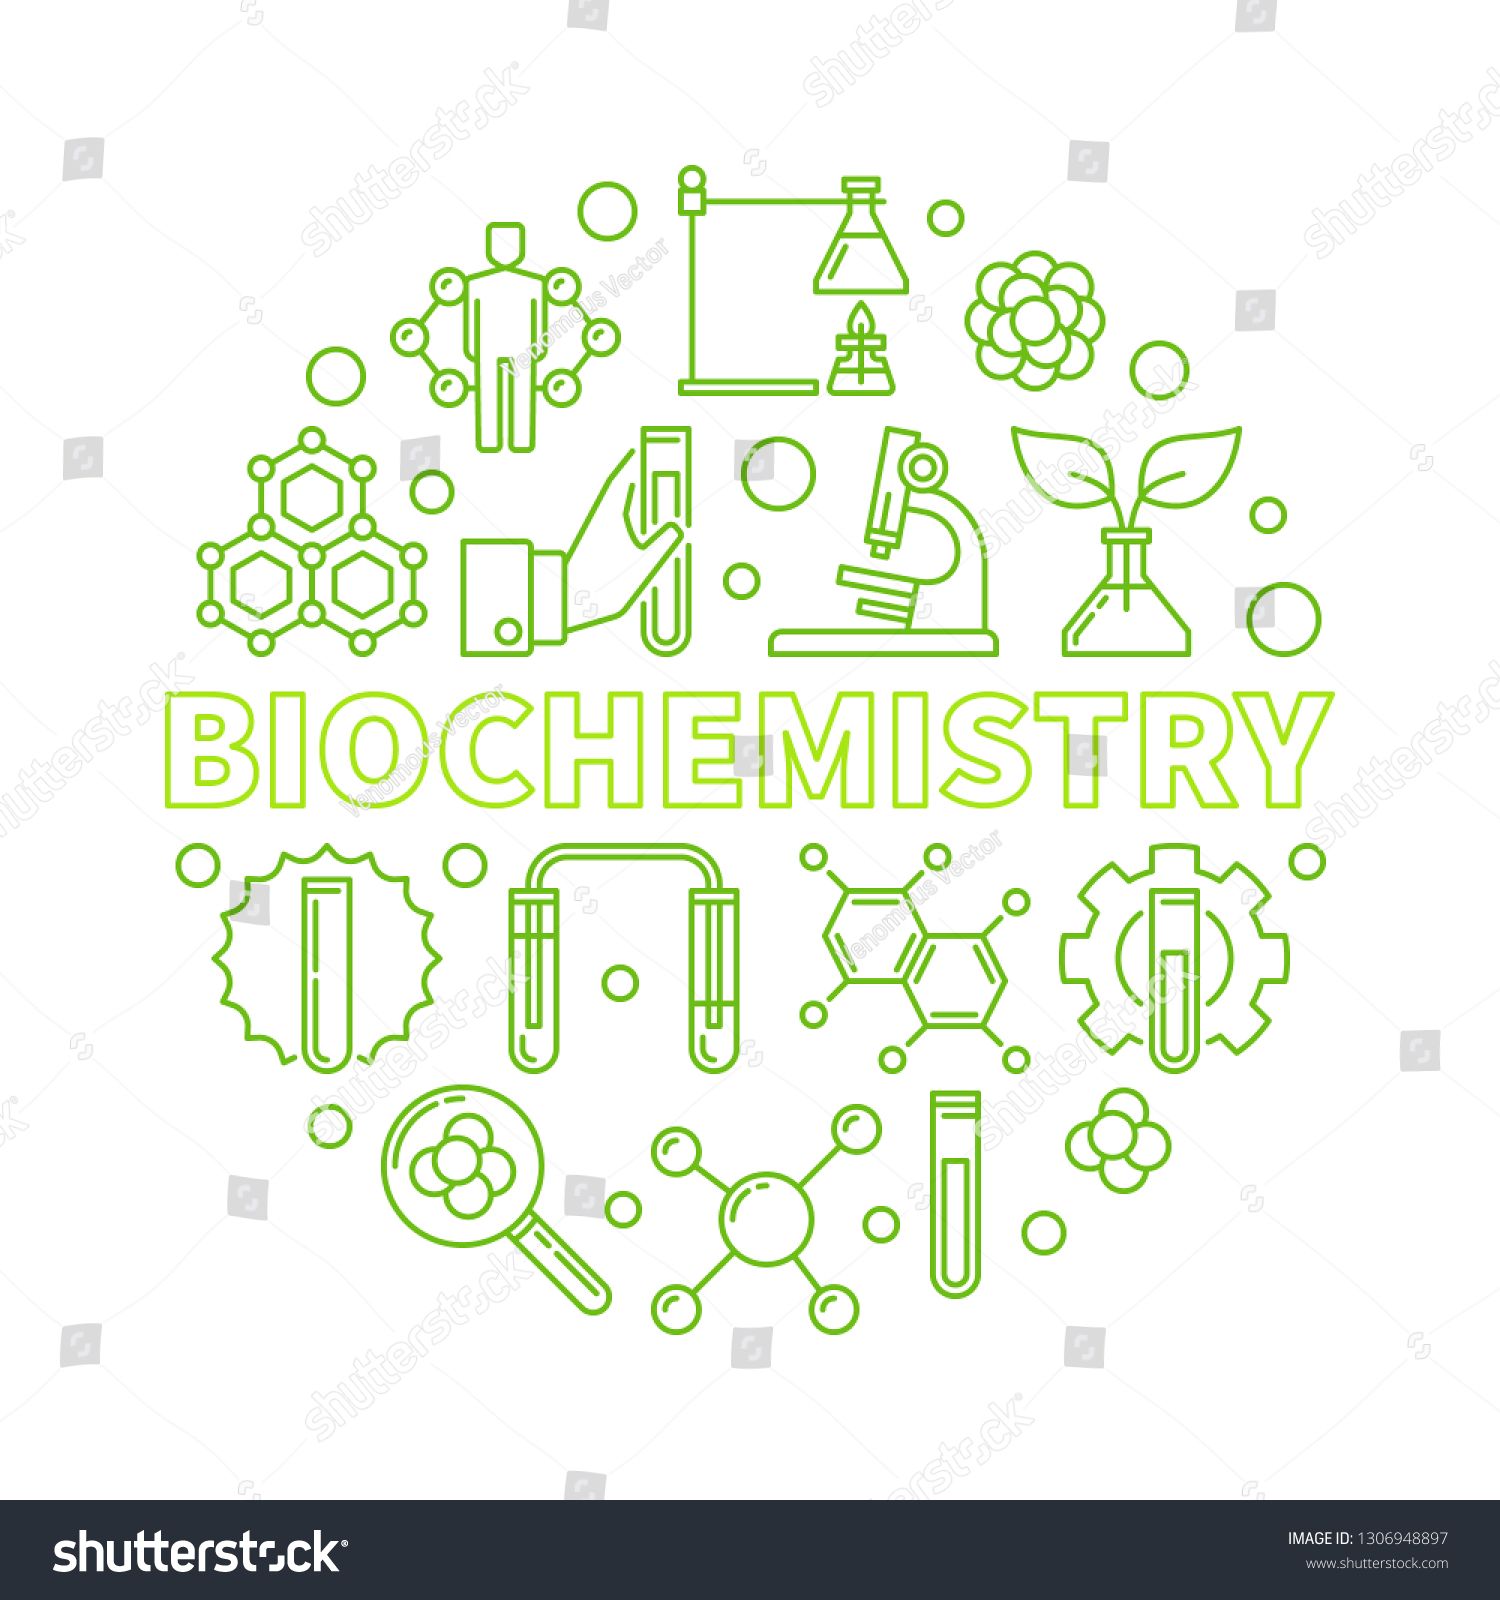 Biochemistry vector science concept green round stock vector royalty free shutterstock biochemistry chemistry posters book cover design